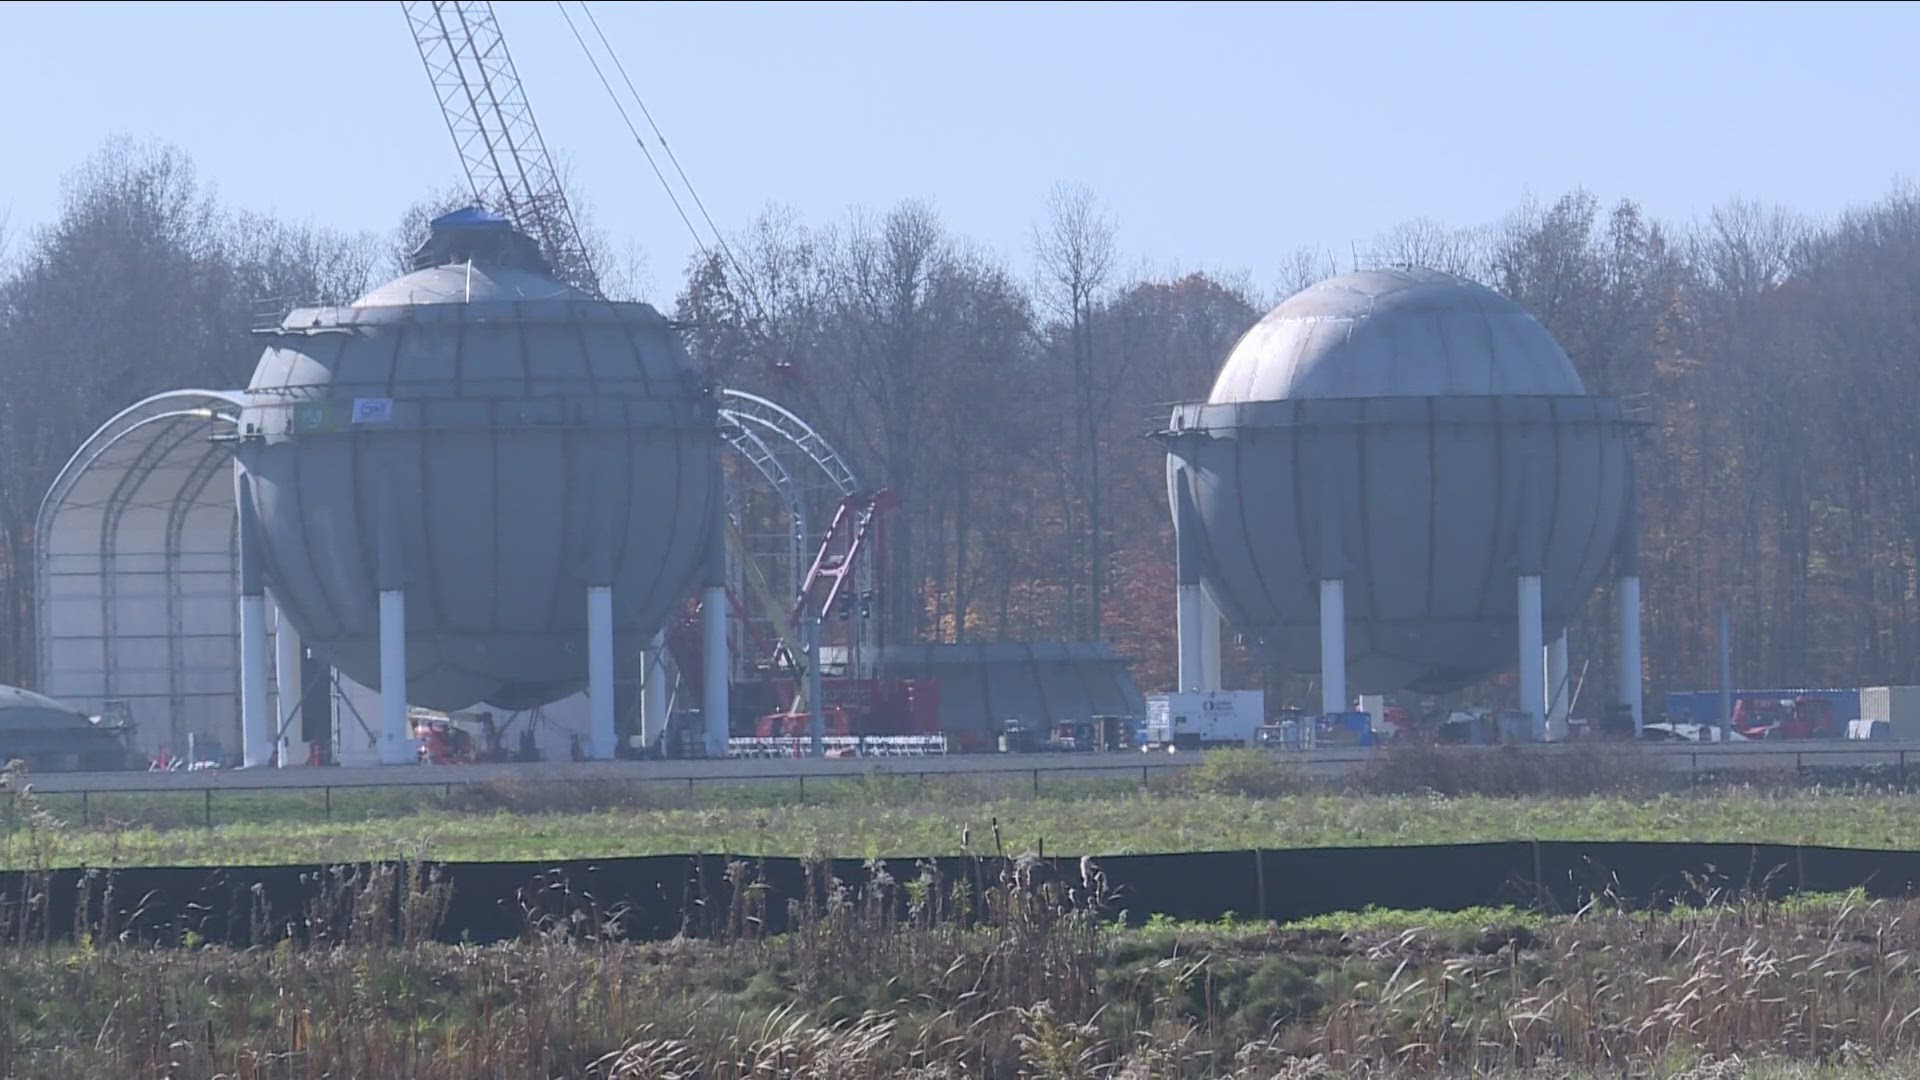 Orleans County is suing the Genesee County Economic Development Center in an effort to stop the construction of a sewage transmission pipeline.